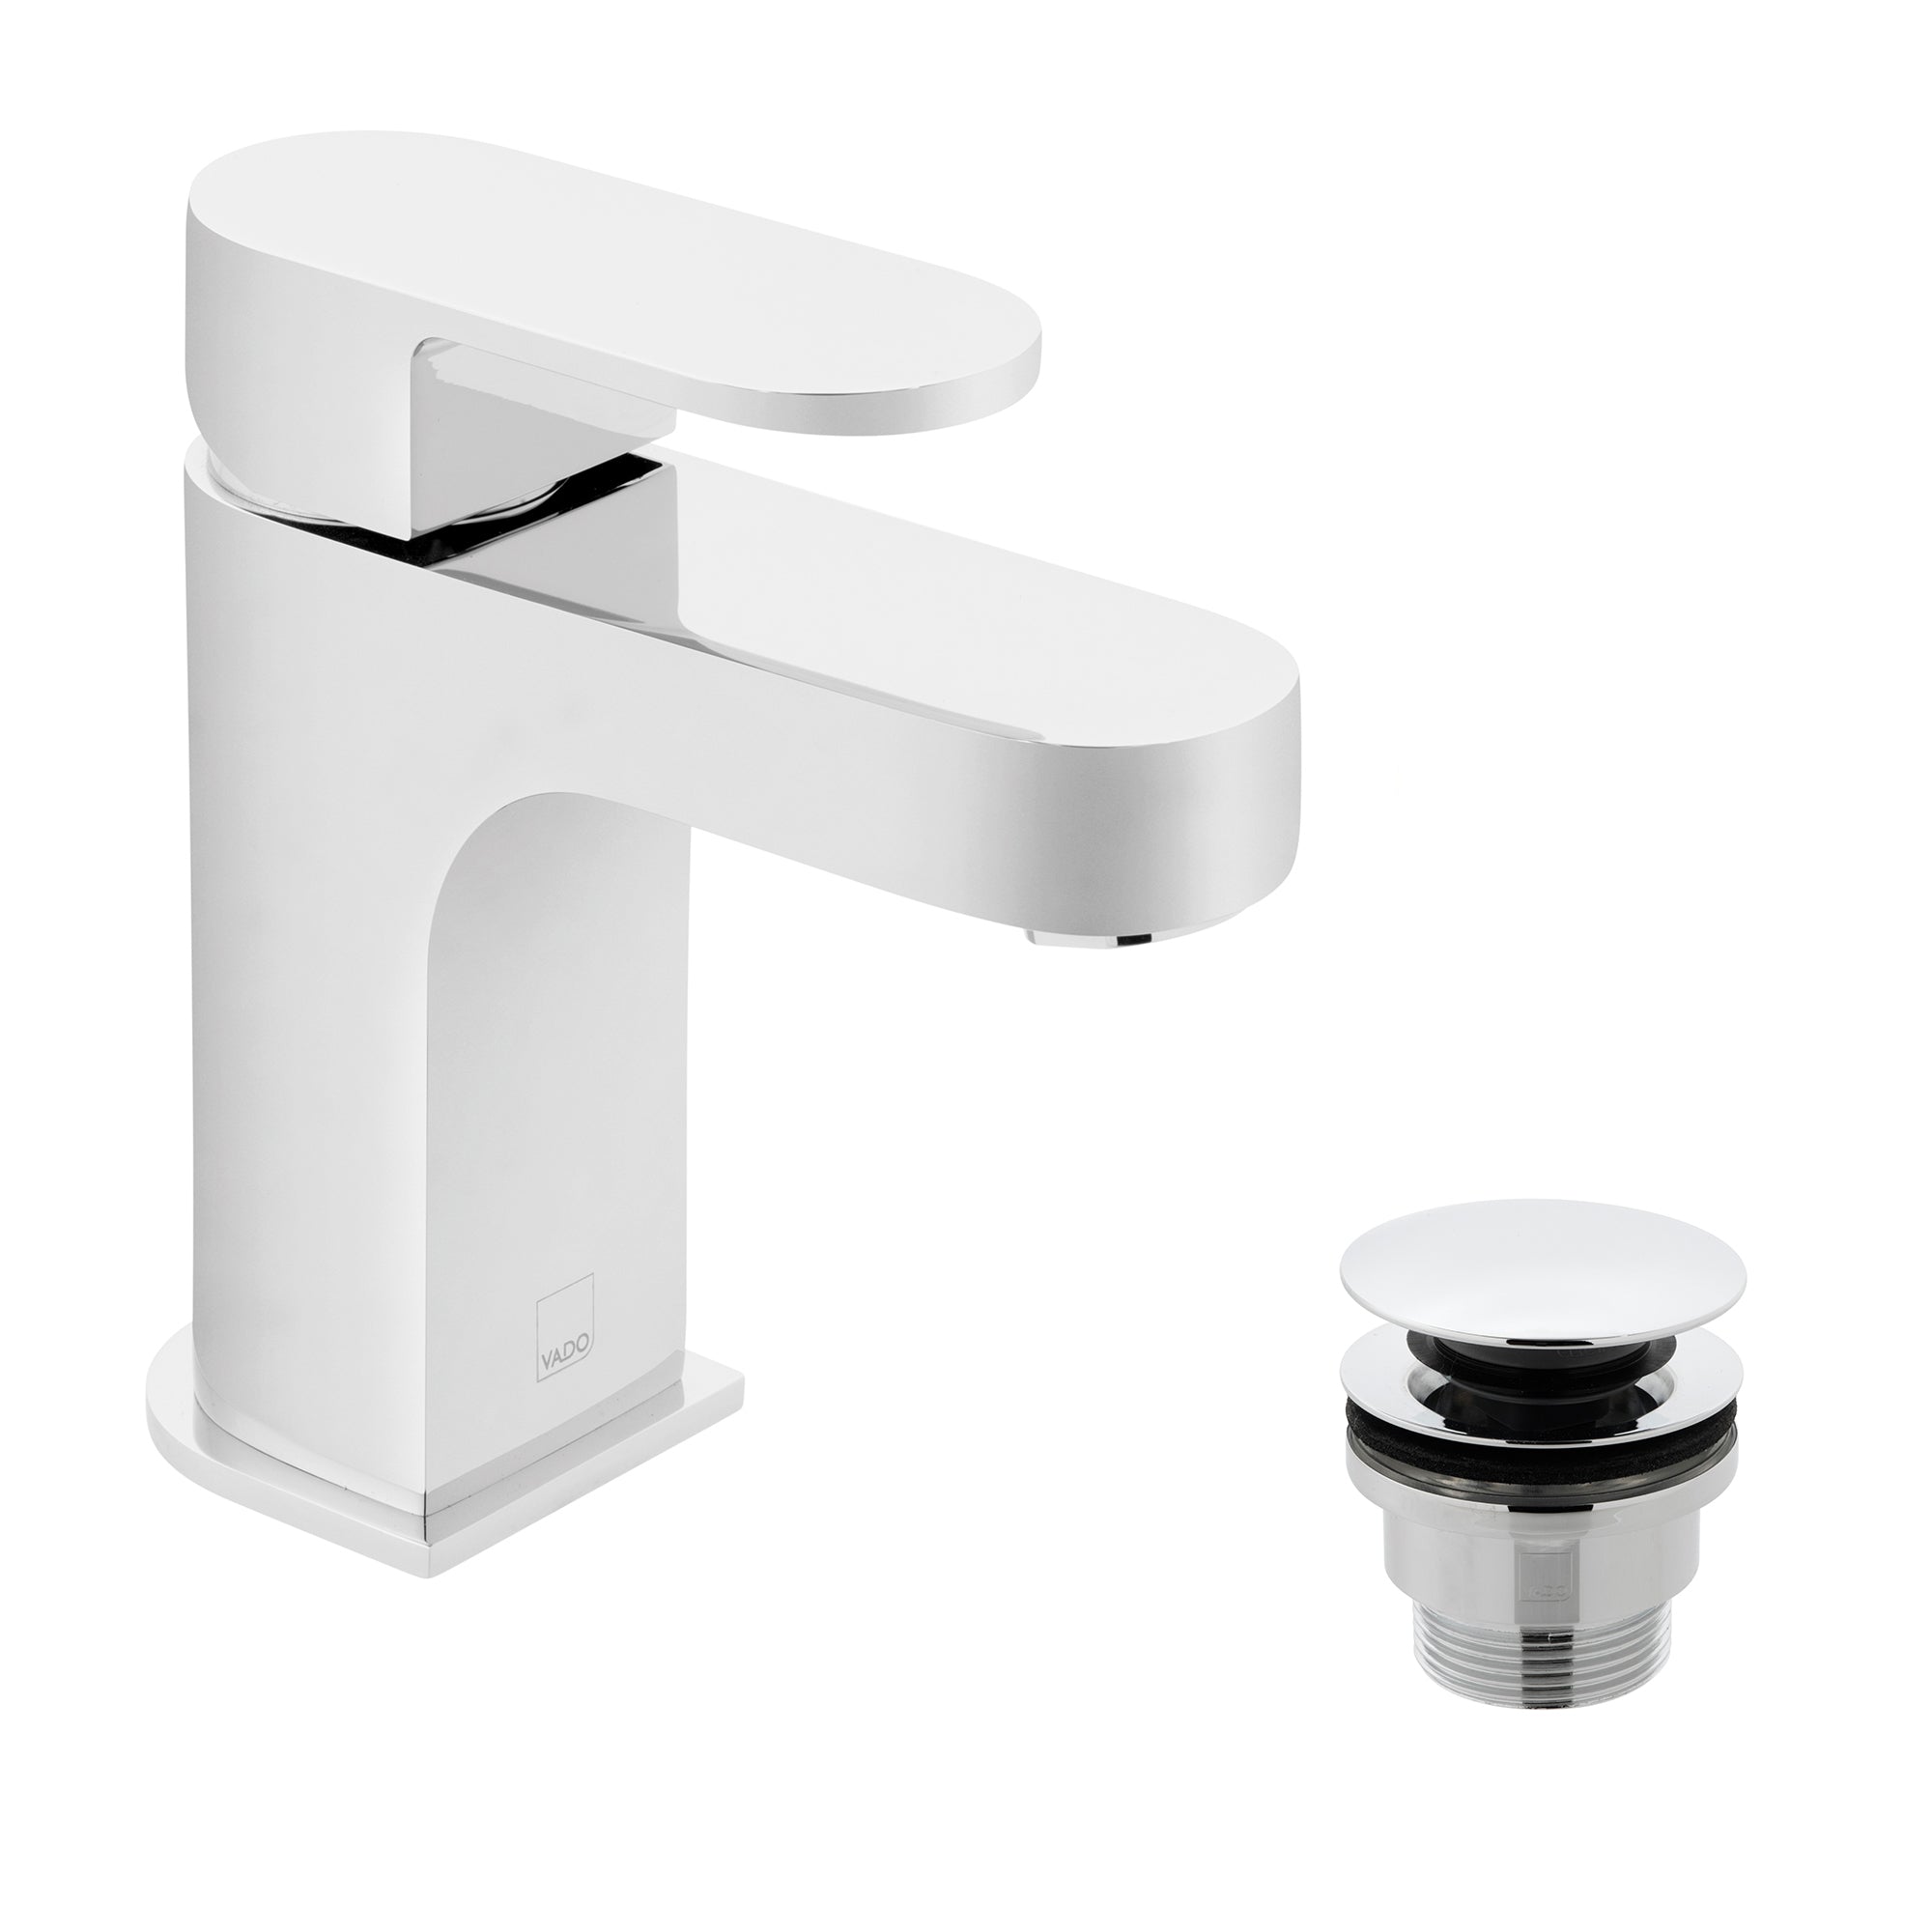 Vado Life Mono Basin Mixer Smooth Bodied Single Lever Deck Mounted with Universal Waste